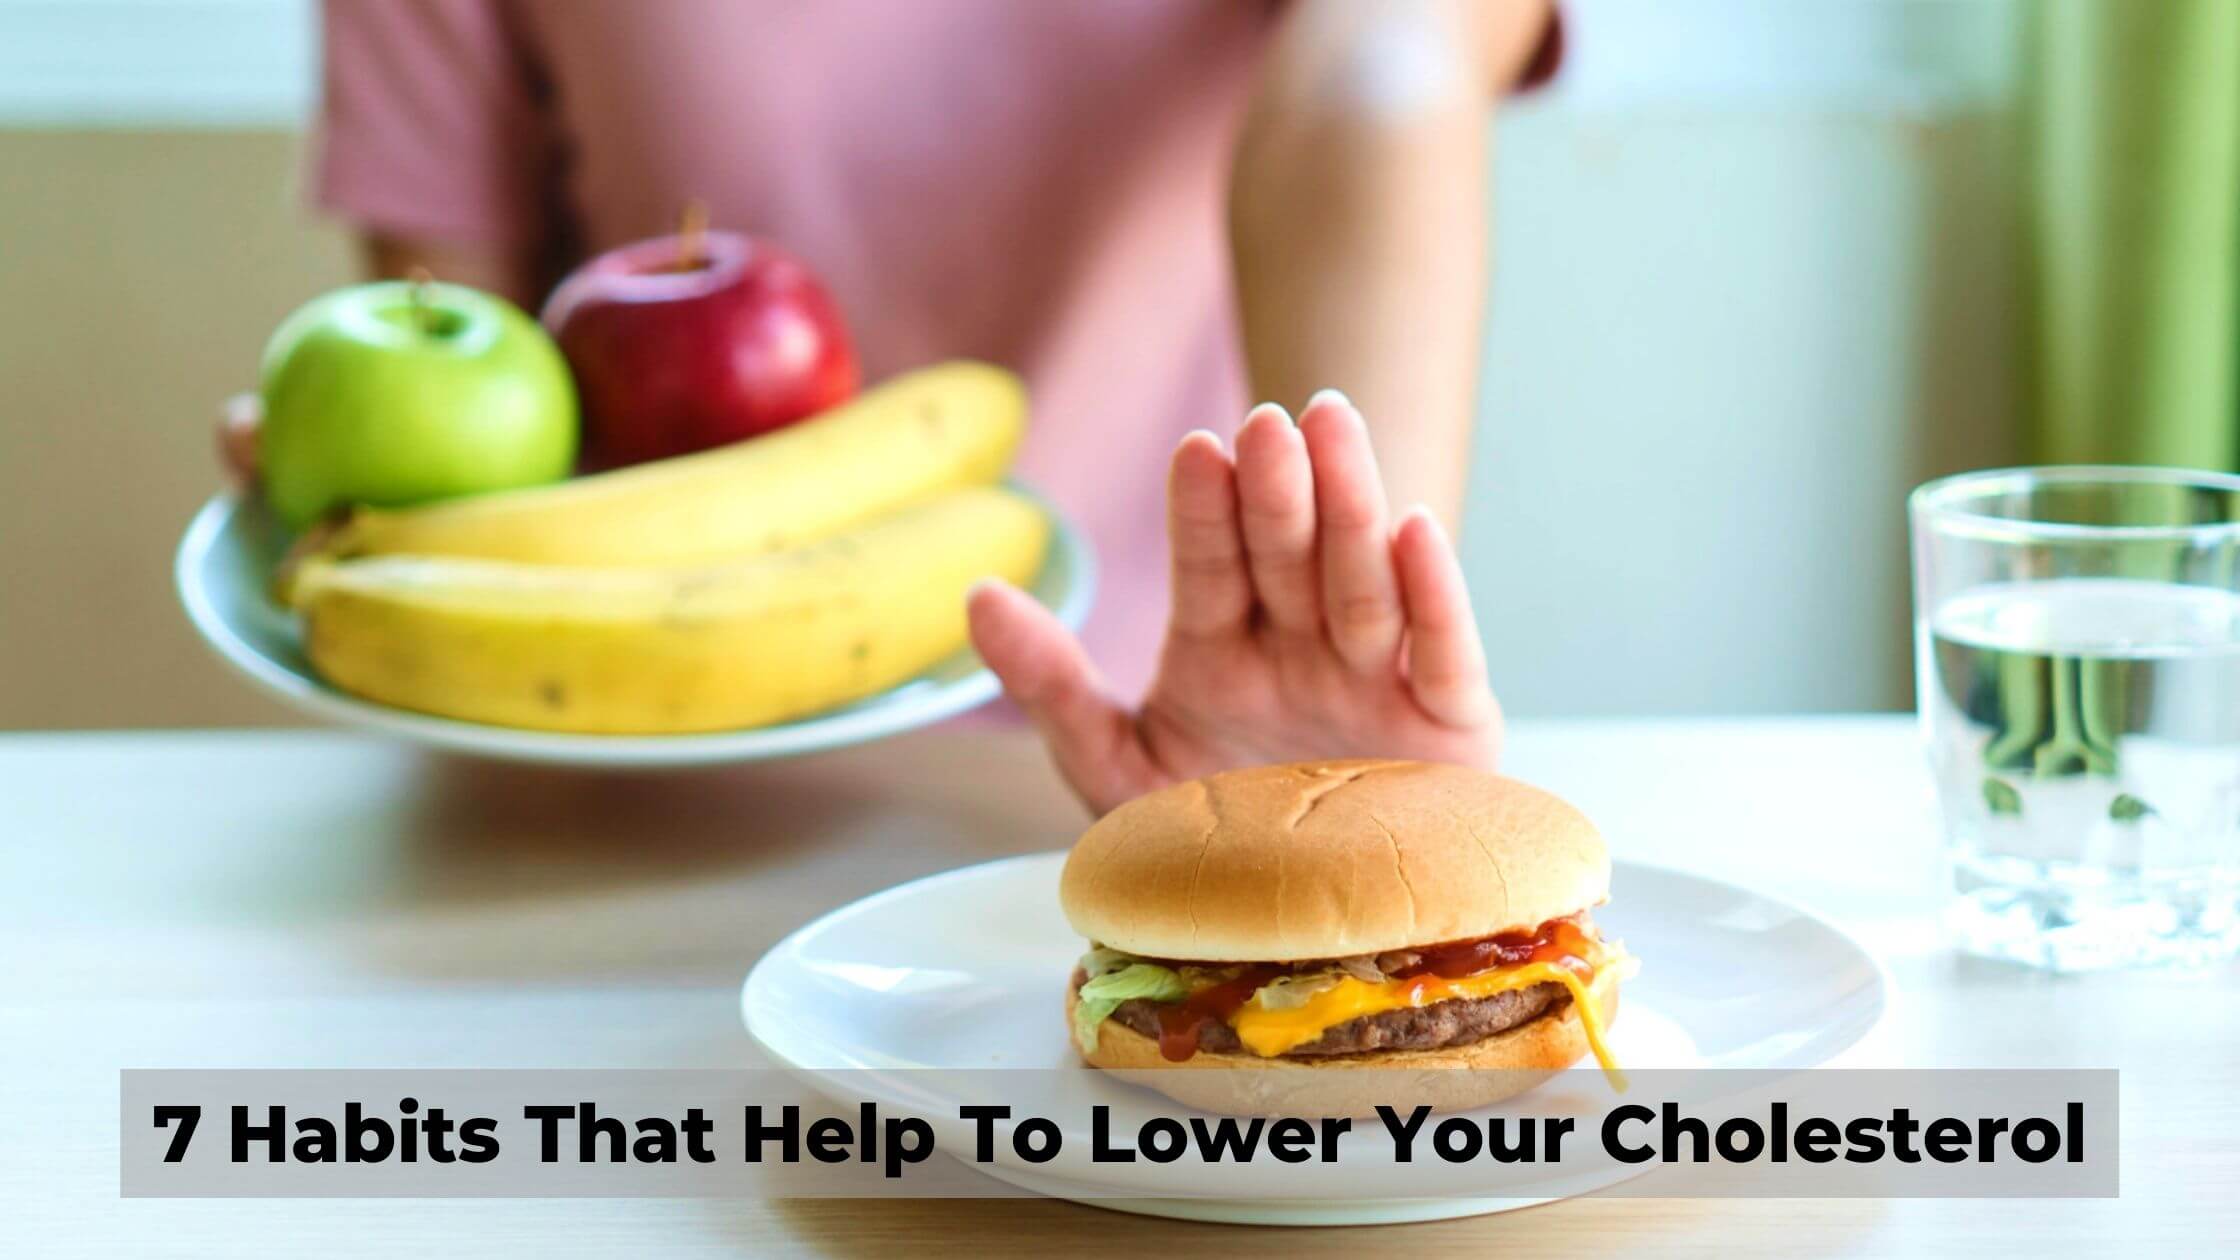 7 Habits That Help Lower Your Cholesterol - Follow A Health Lifestyle!